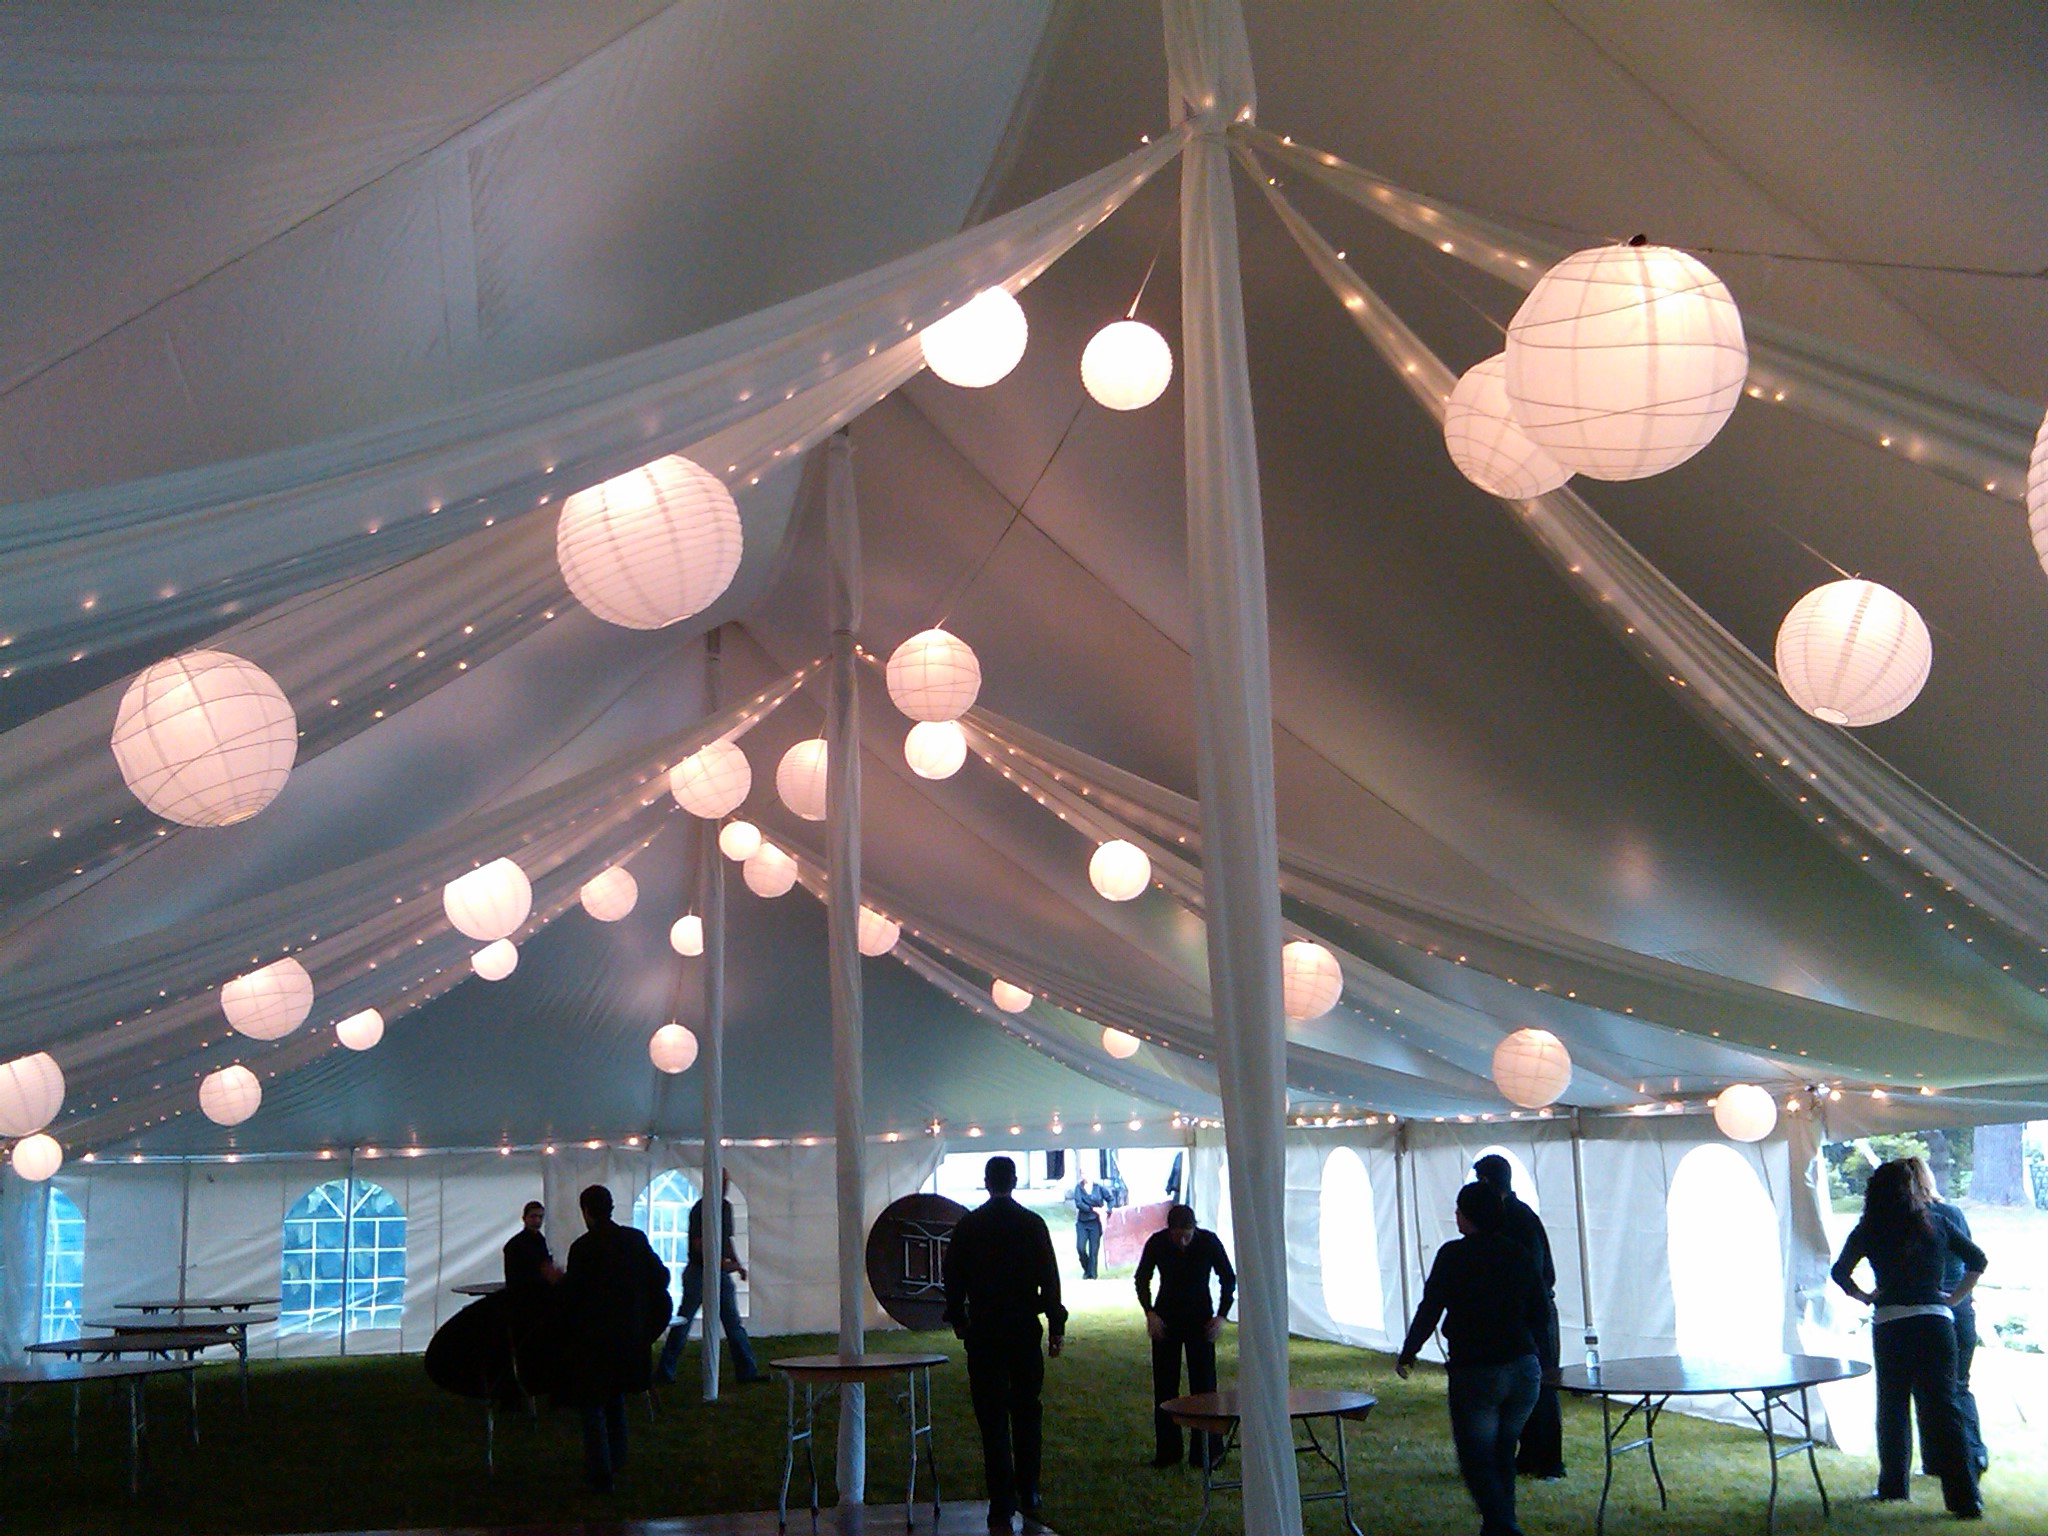 White Pole Tent with Paper Lanterns and Swags